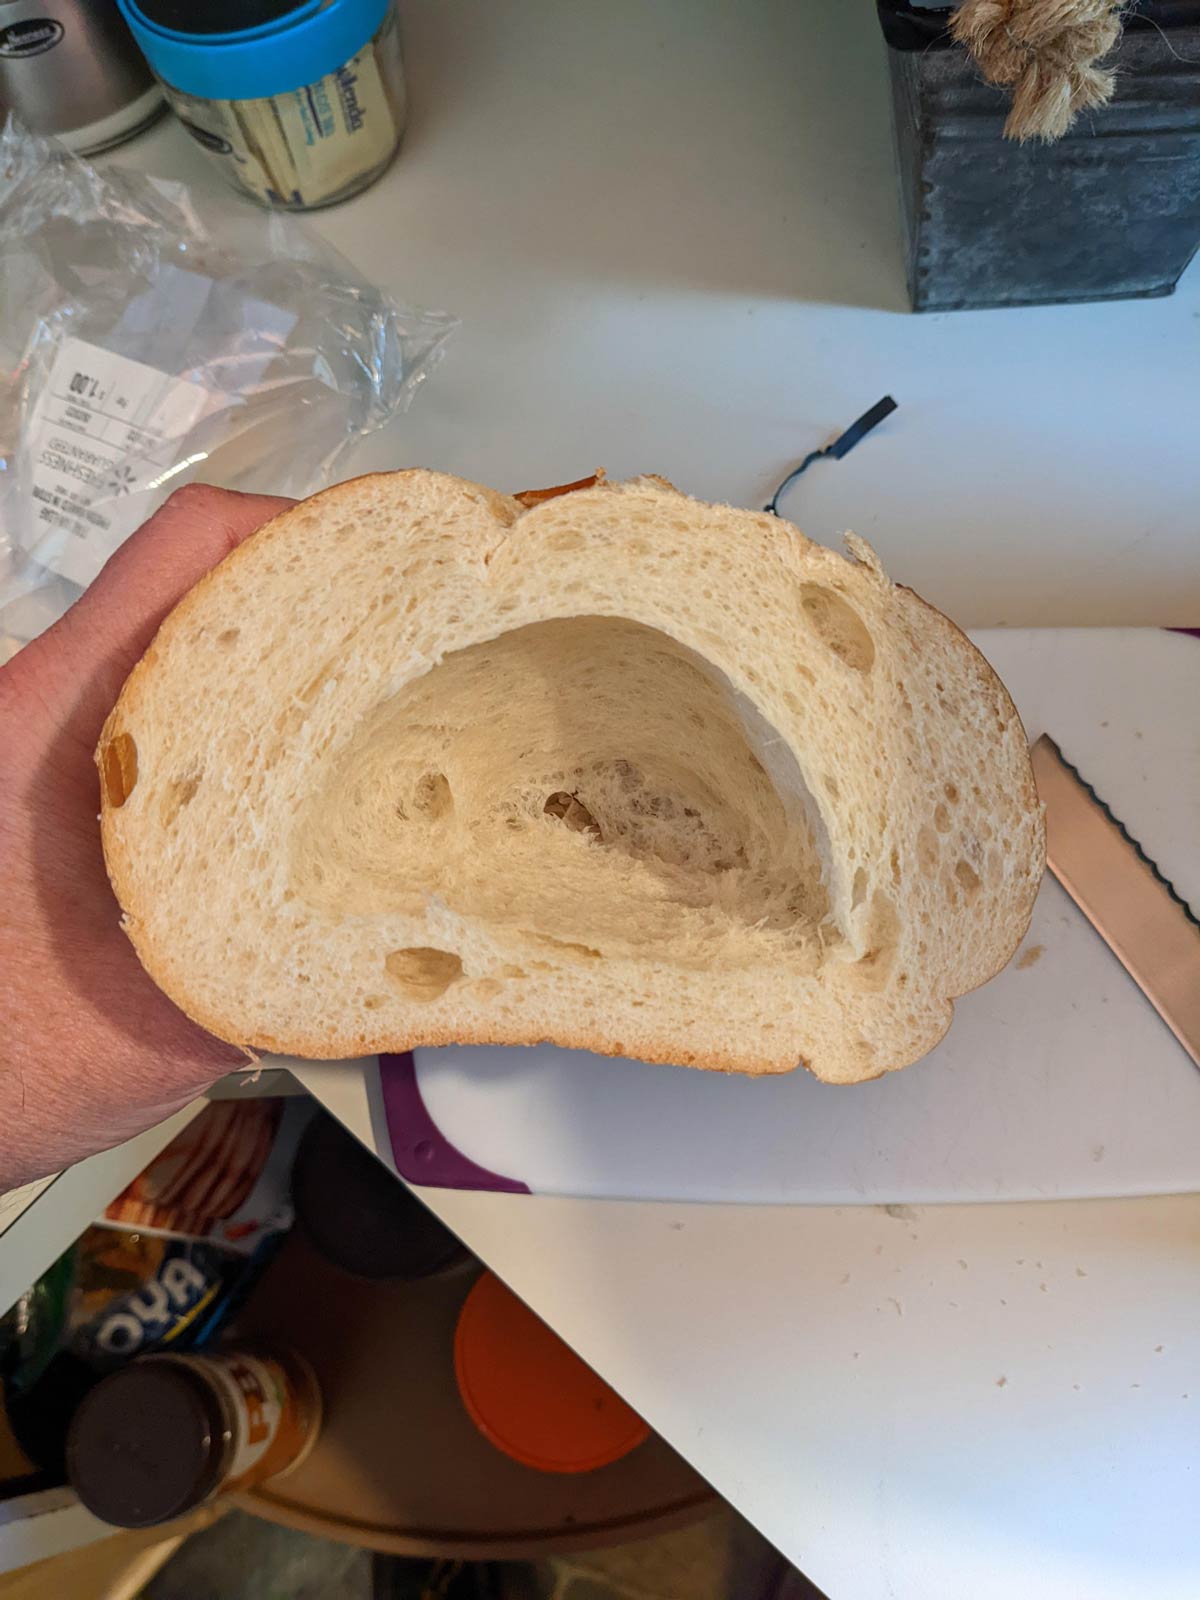 I feel this loaf should have been marked 'reduced carbs'